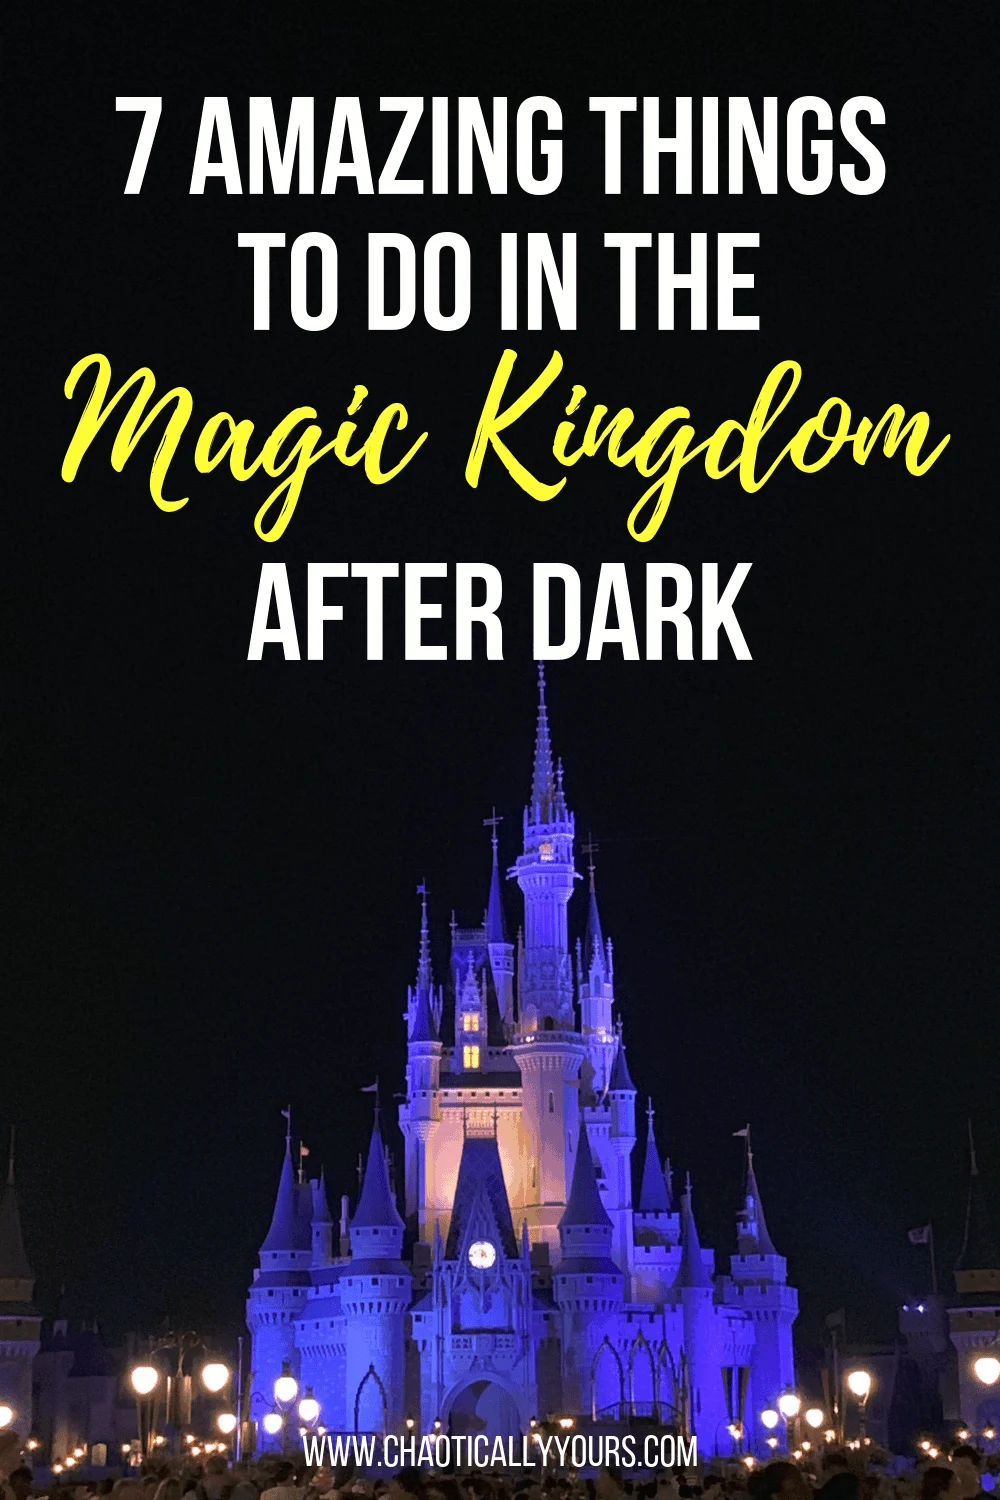 7 Amazing Things To Do In The Magic Kingdom At Night